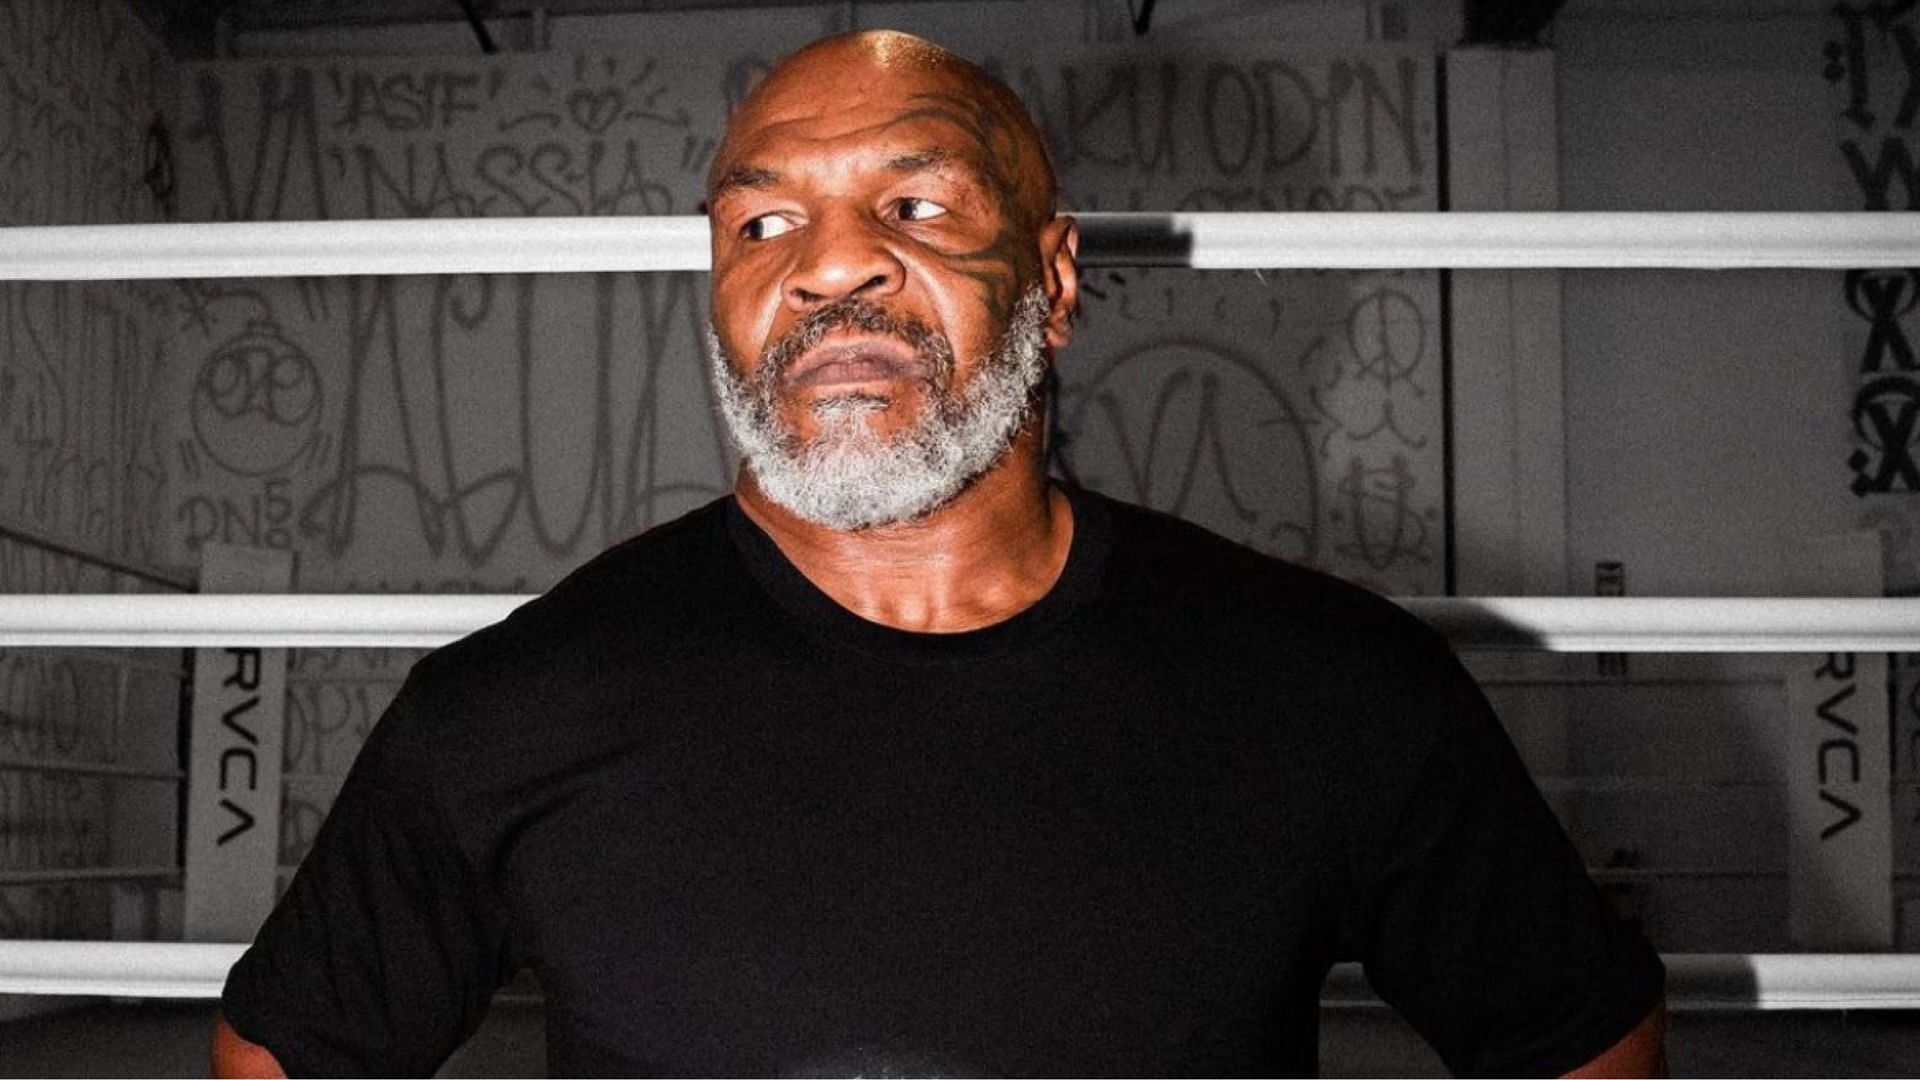 Mike Tyson [image courtesy of @miketyson Instagram]